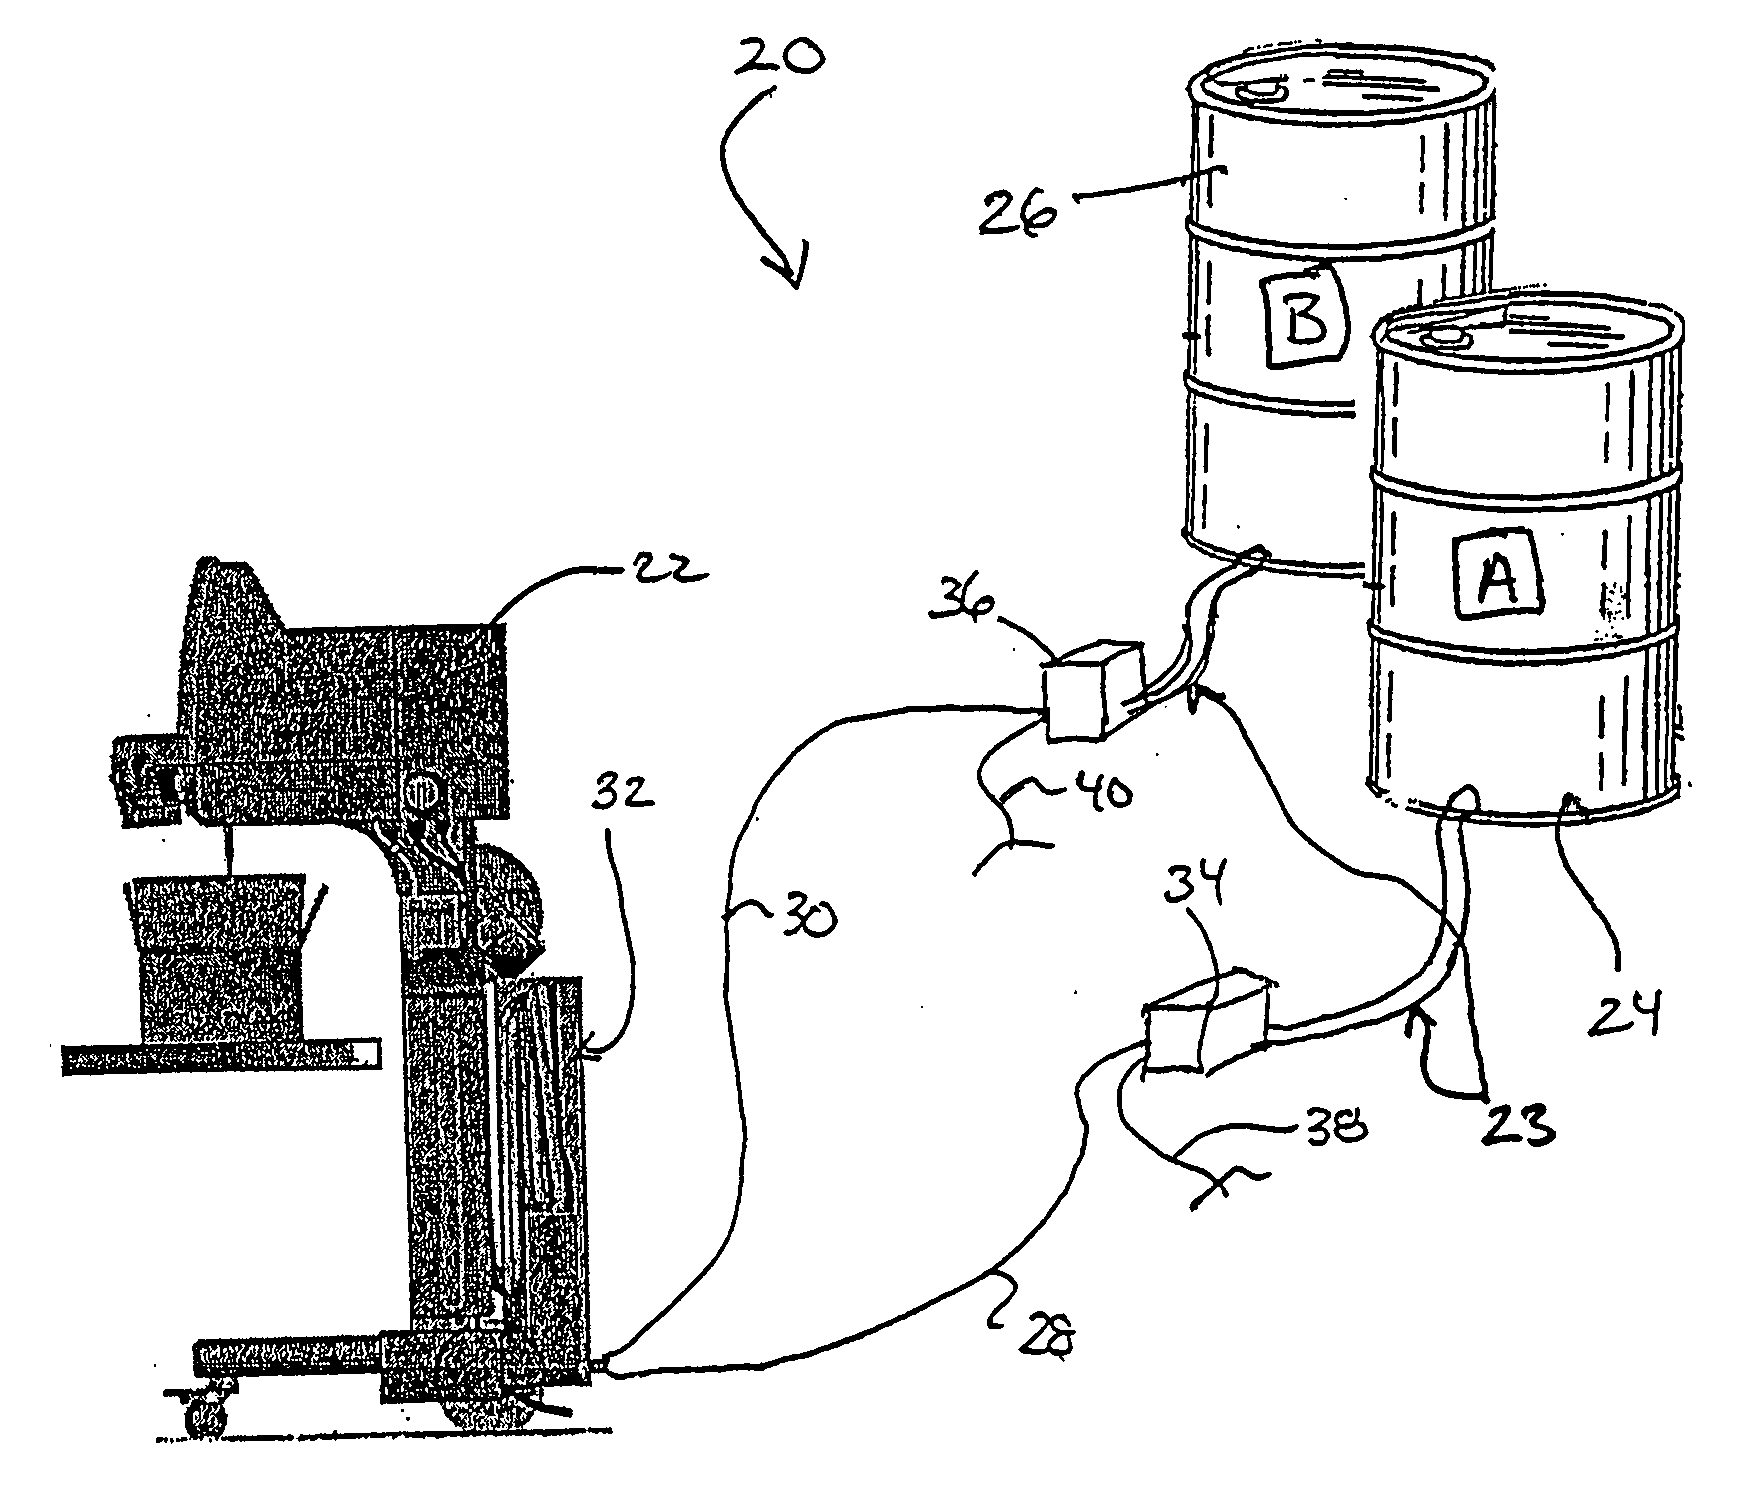 Dispensing system with means for easy access of dispenser components and method of using same